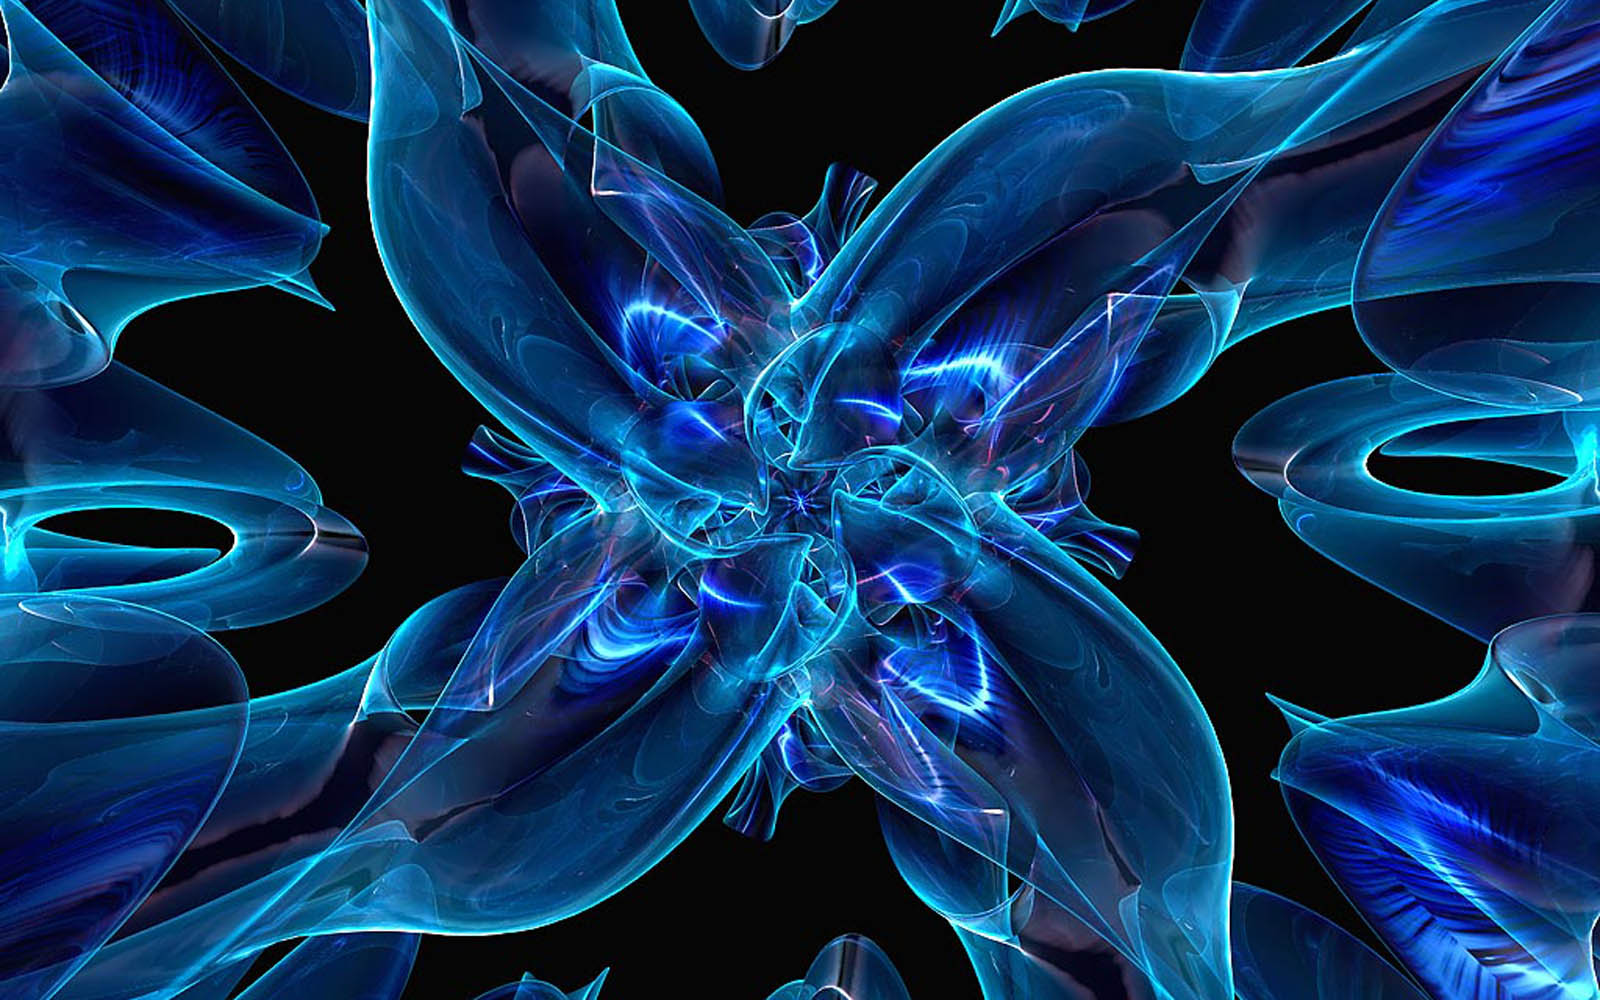  wallpapers  Blue  3D  Wallpapers 